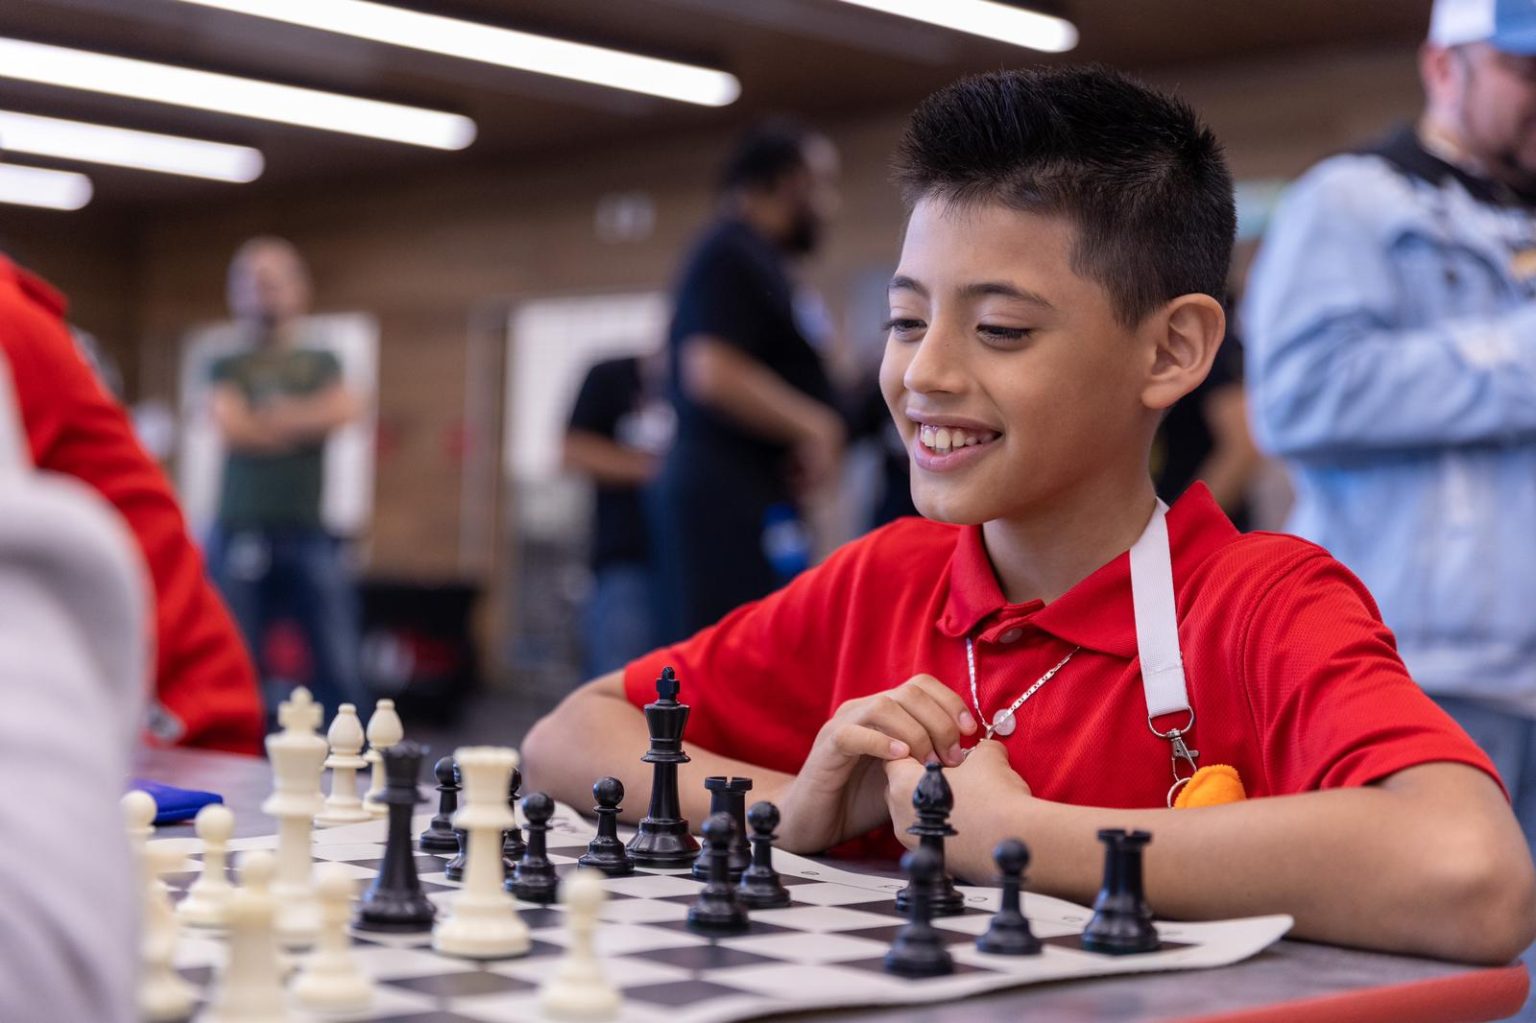 Student in red shirt playing chess